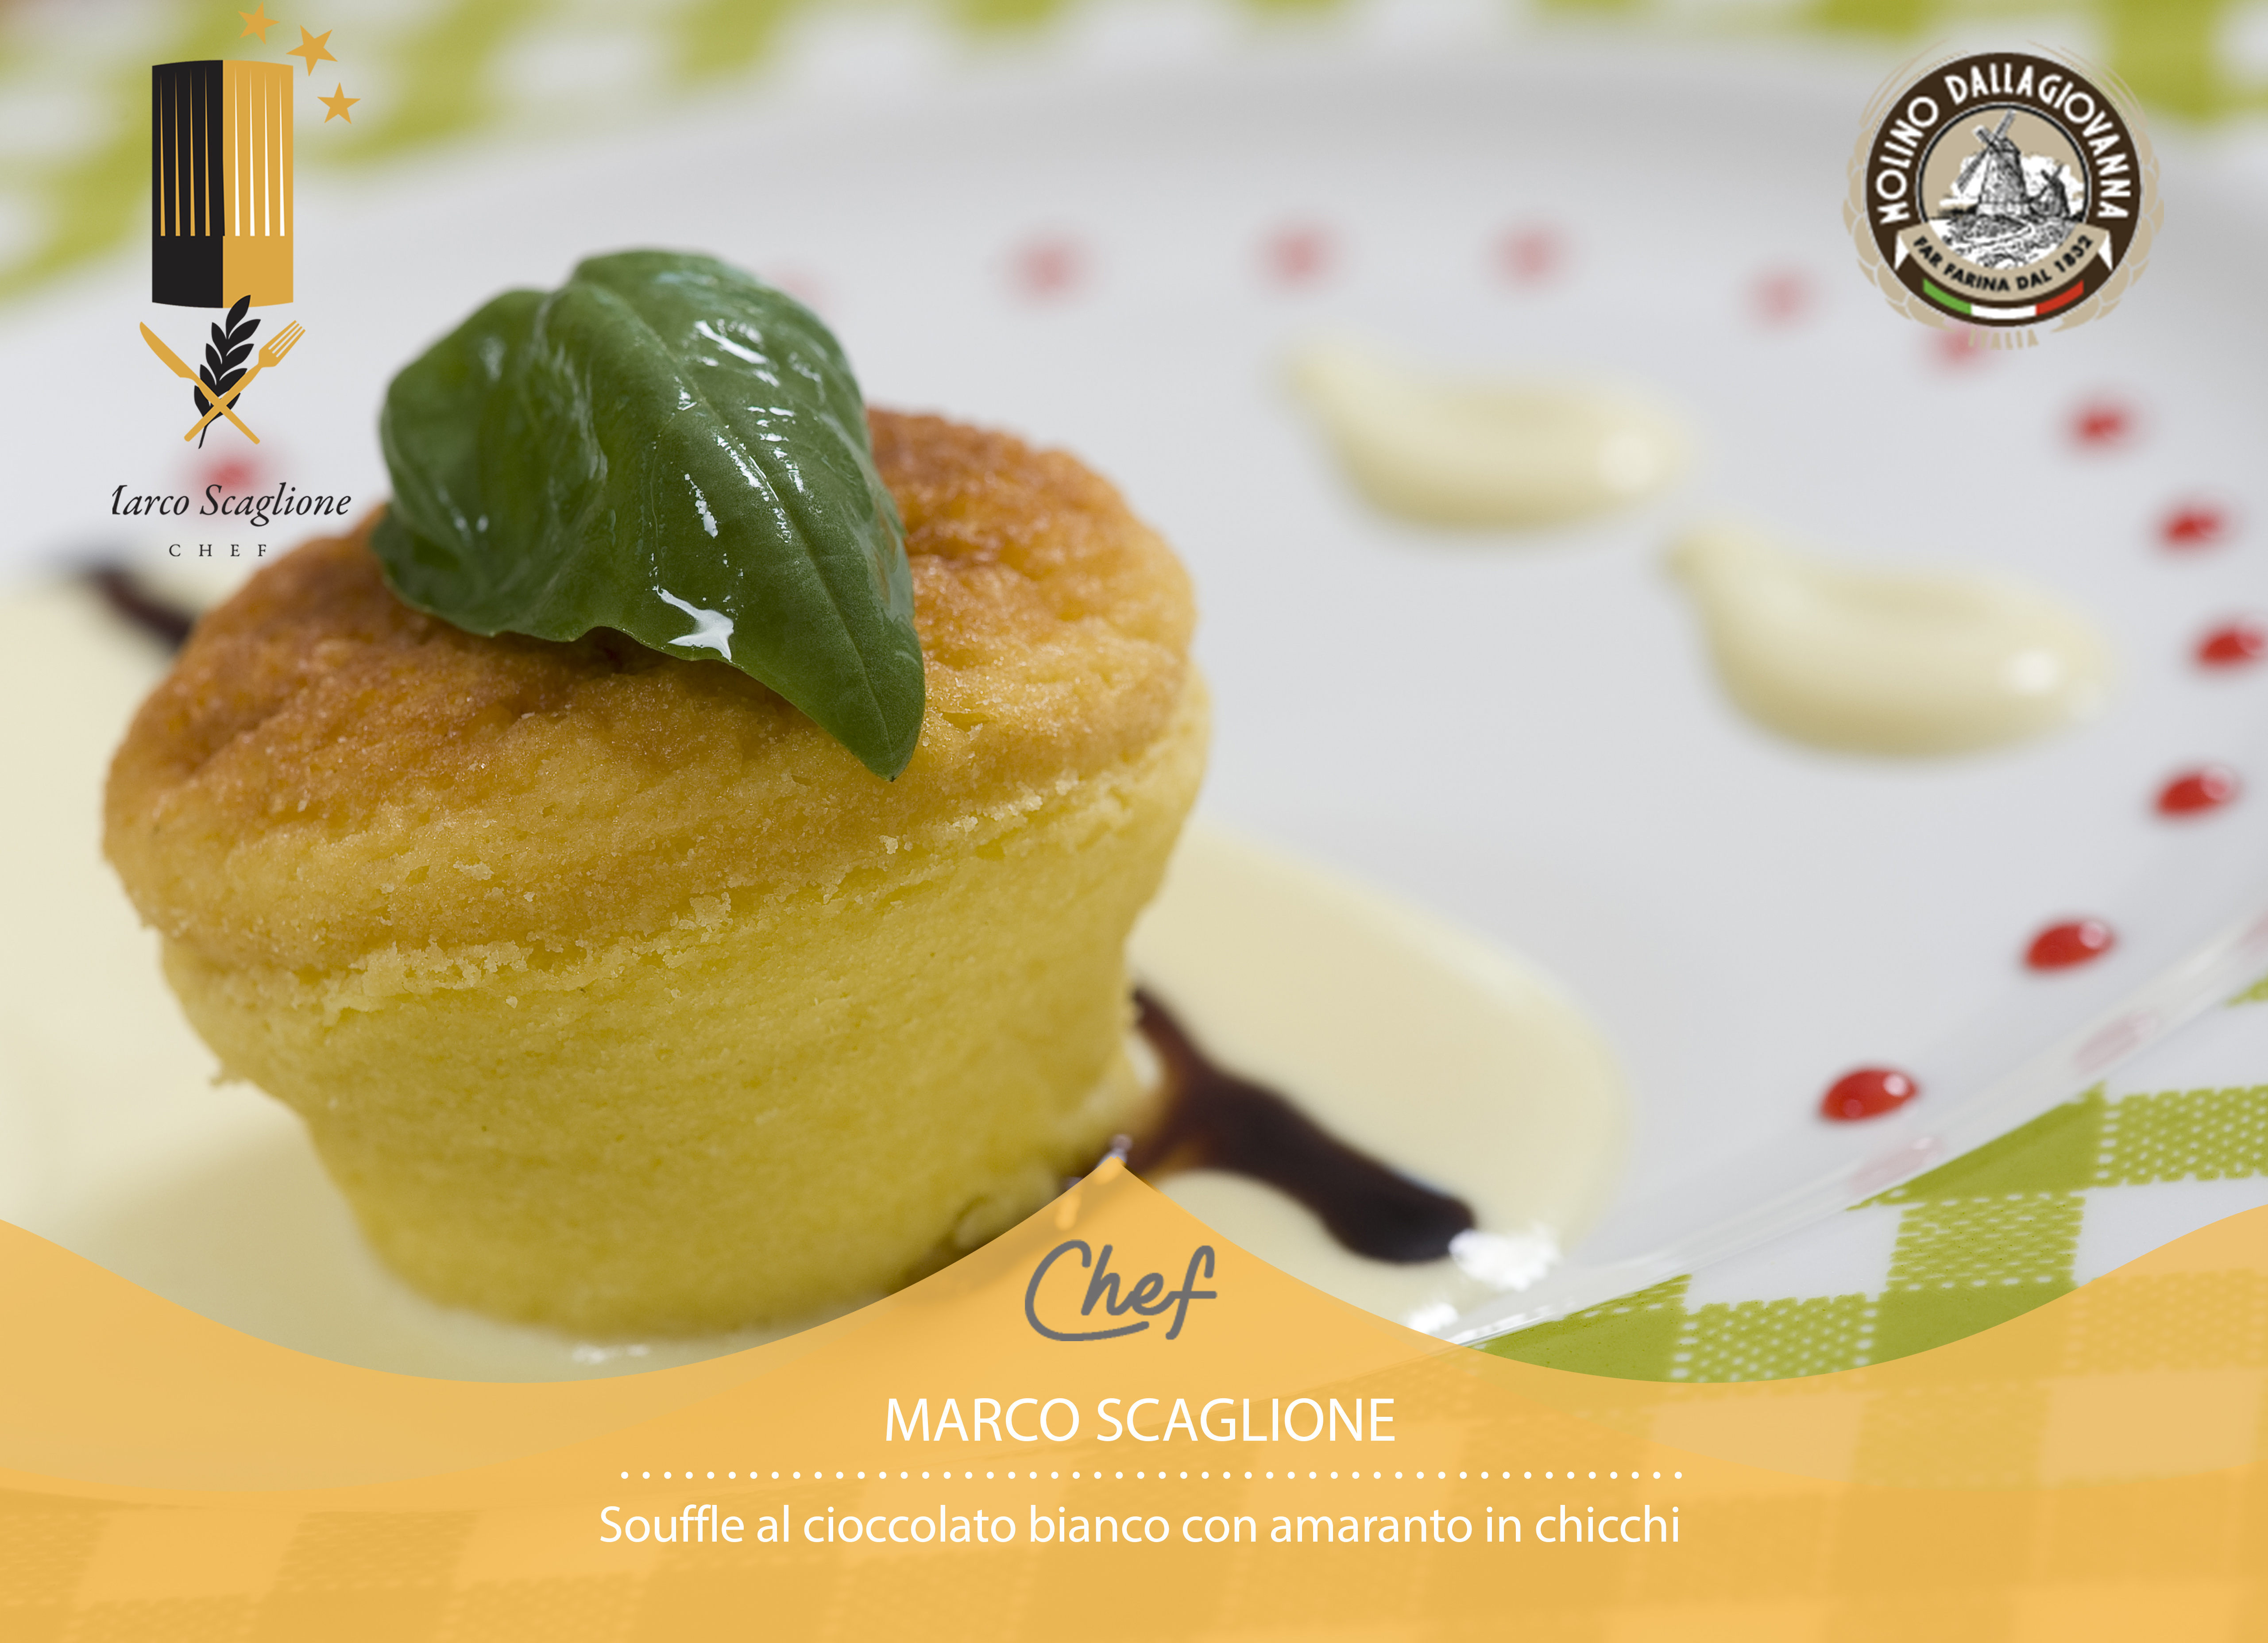 Gluten-free soufflé with white chocolate, pineapple cream, Balsamic Vinegar and drops of strawberry